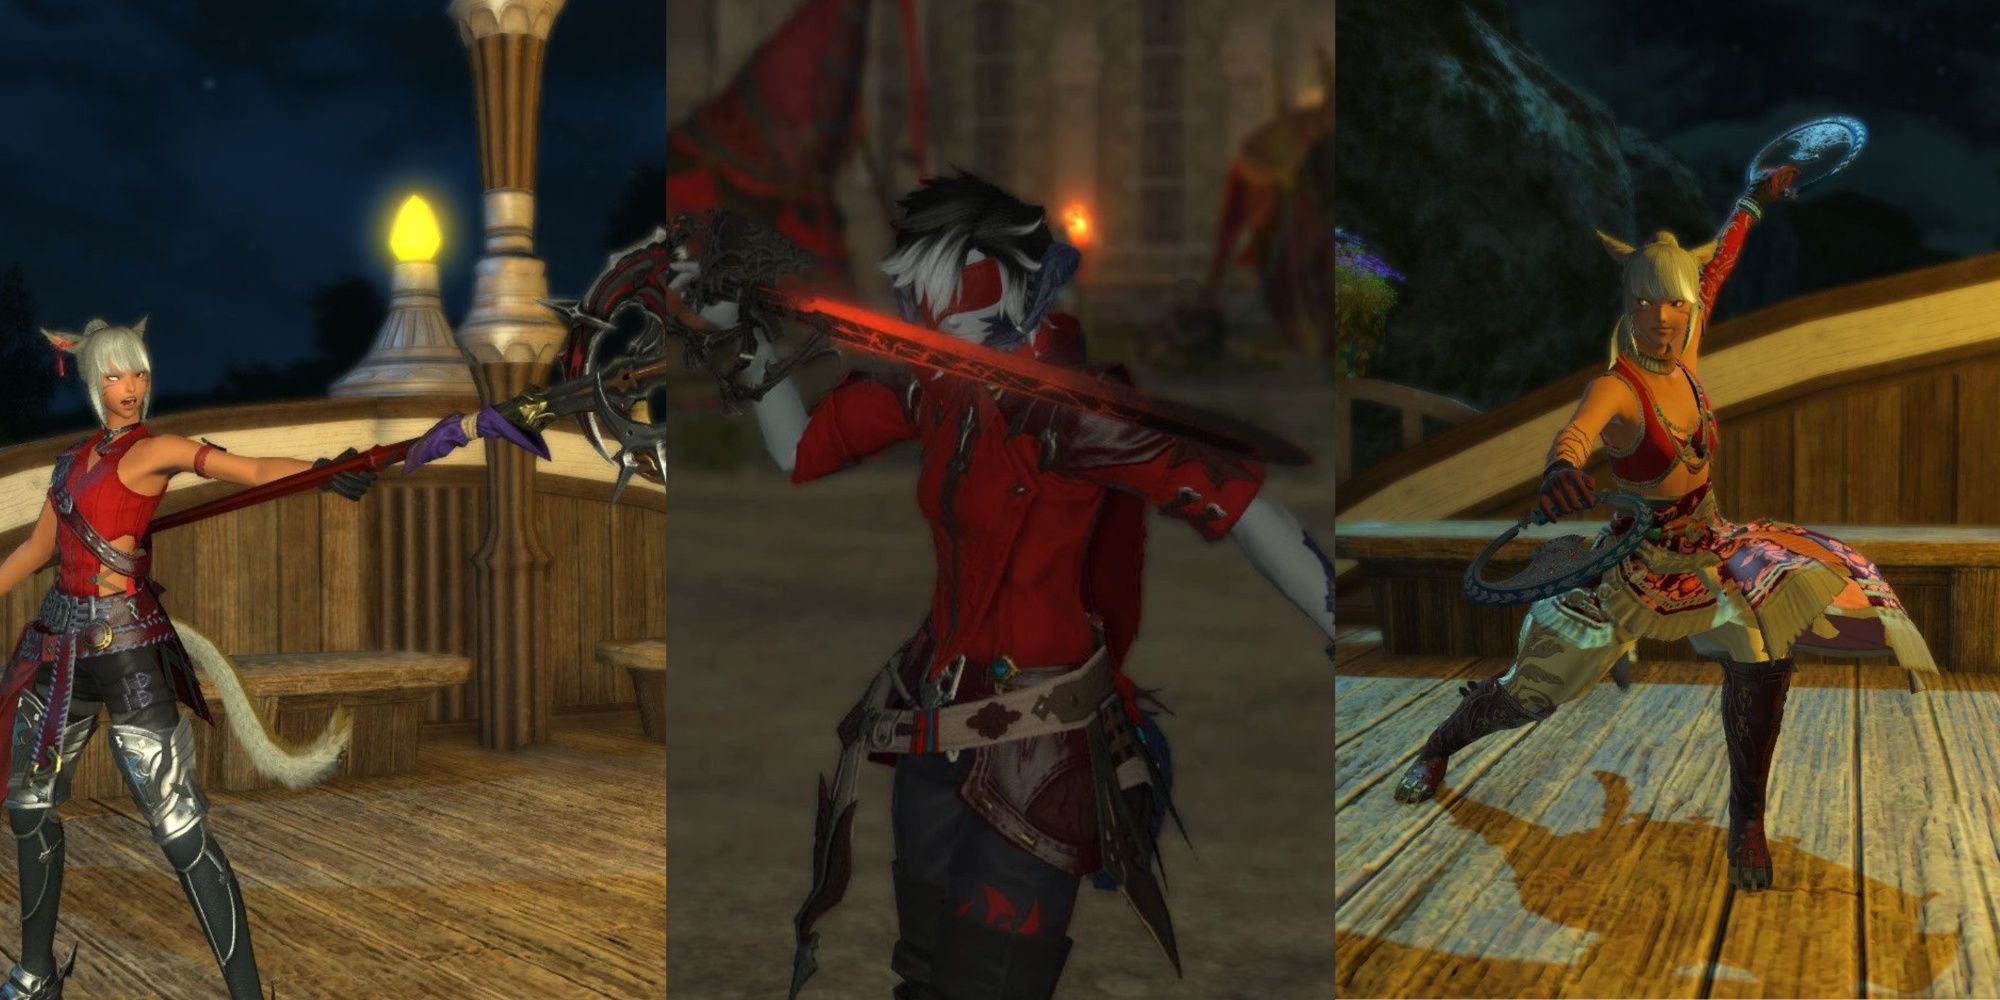 split image of melee and ranged DPS classes holding their weapons in Final Fantasy 14